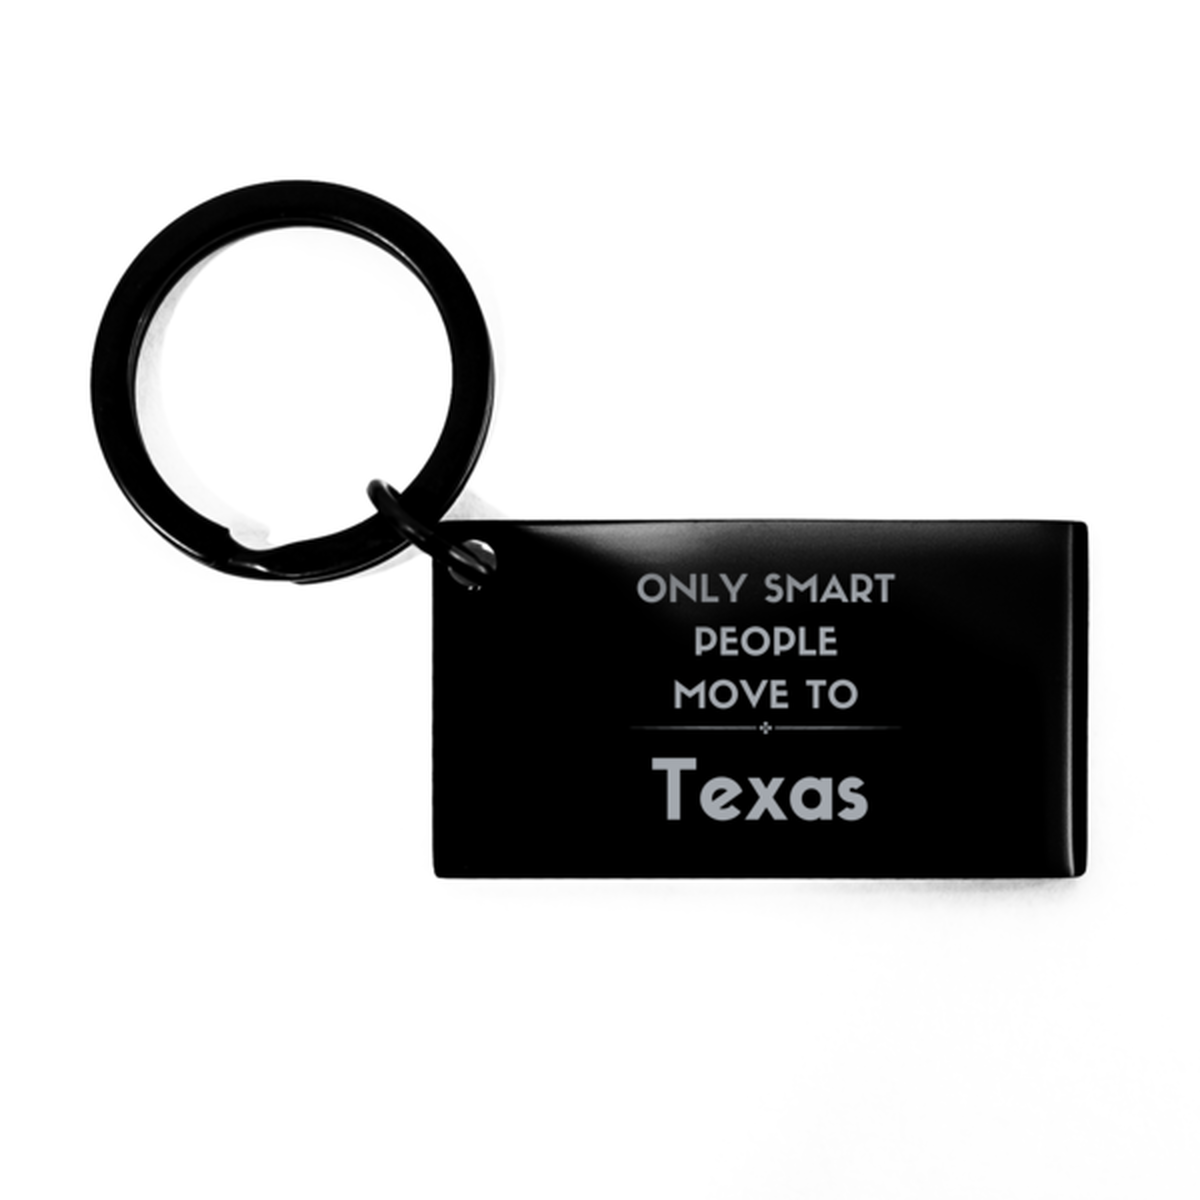 Only smart people move to Texas Keychain, Gag Gifts For Texas, Move to Texas Gifts for Friends Coworker Funny Saying Quote